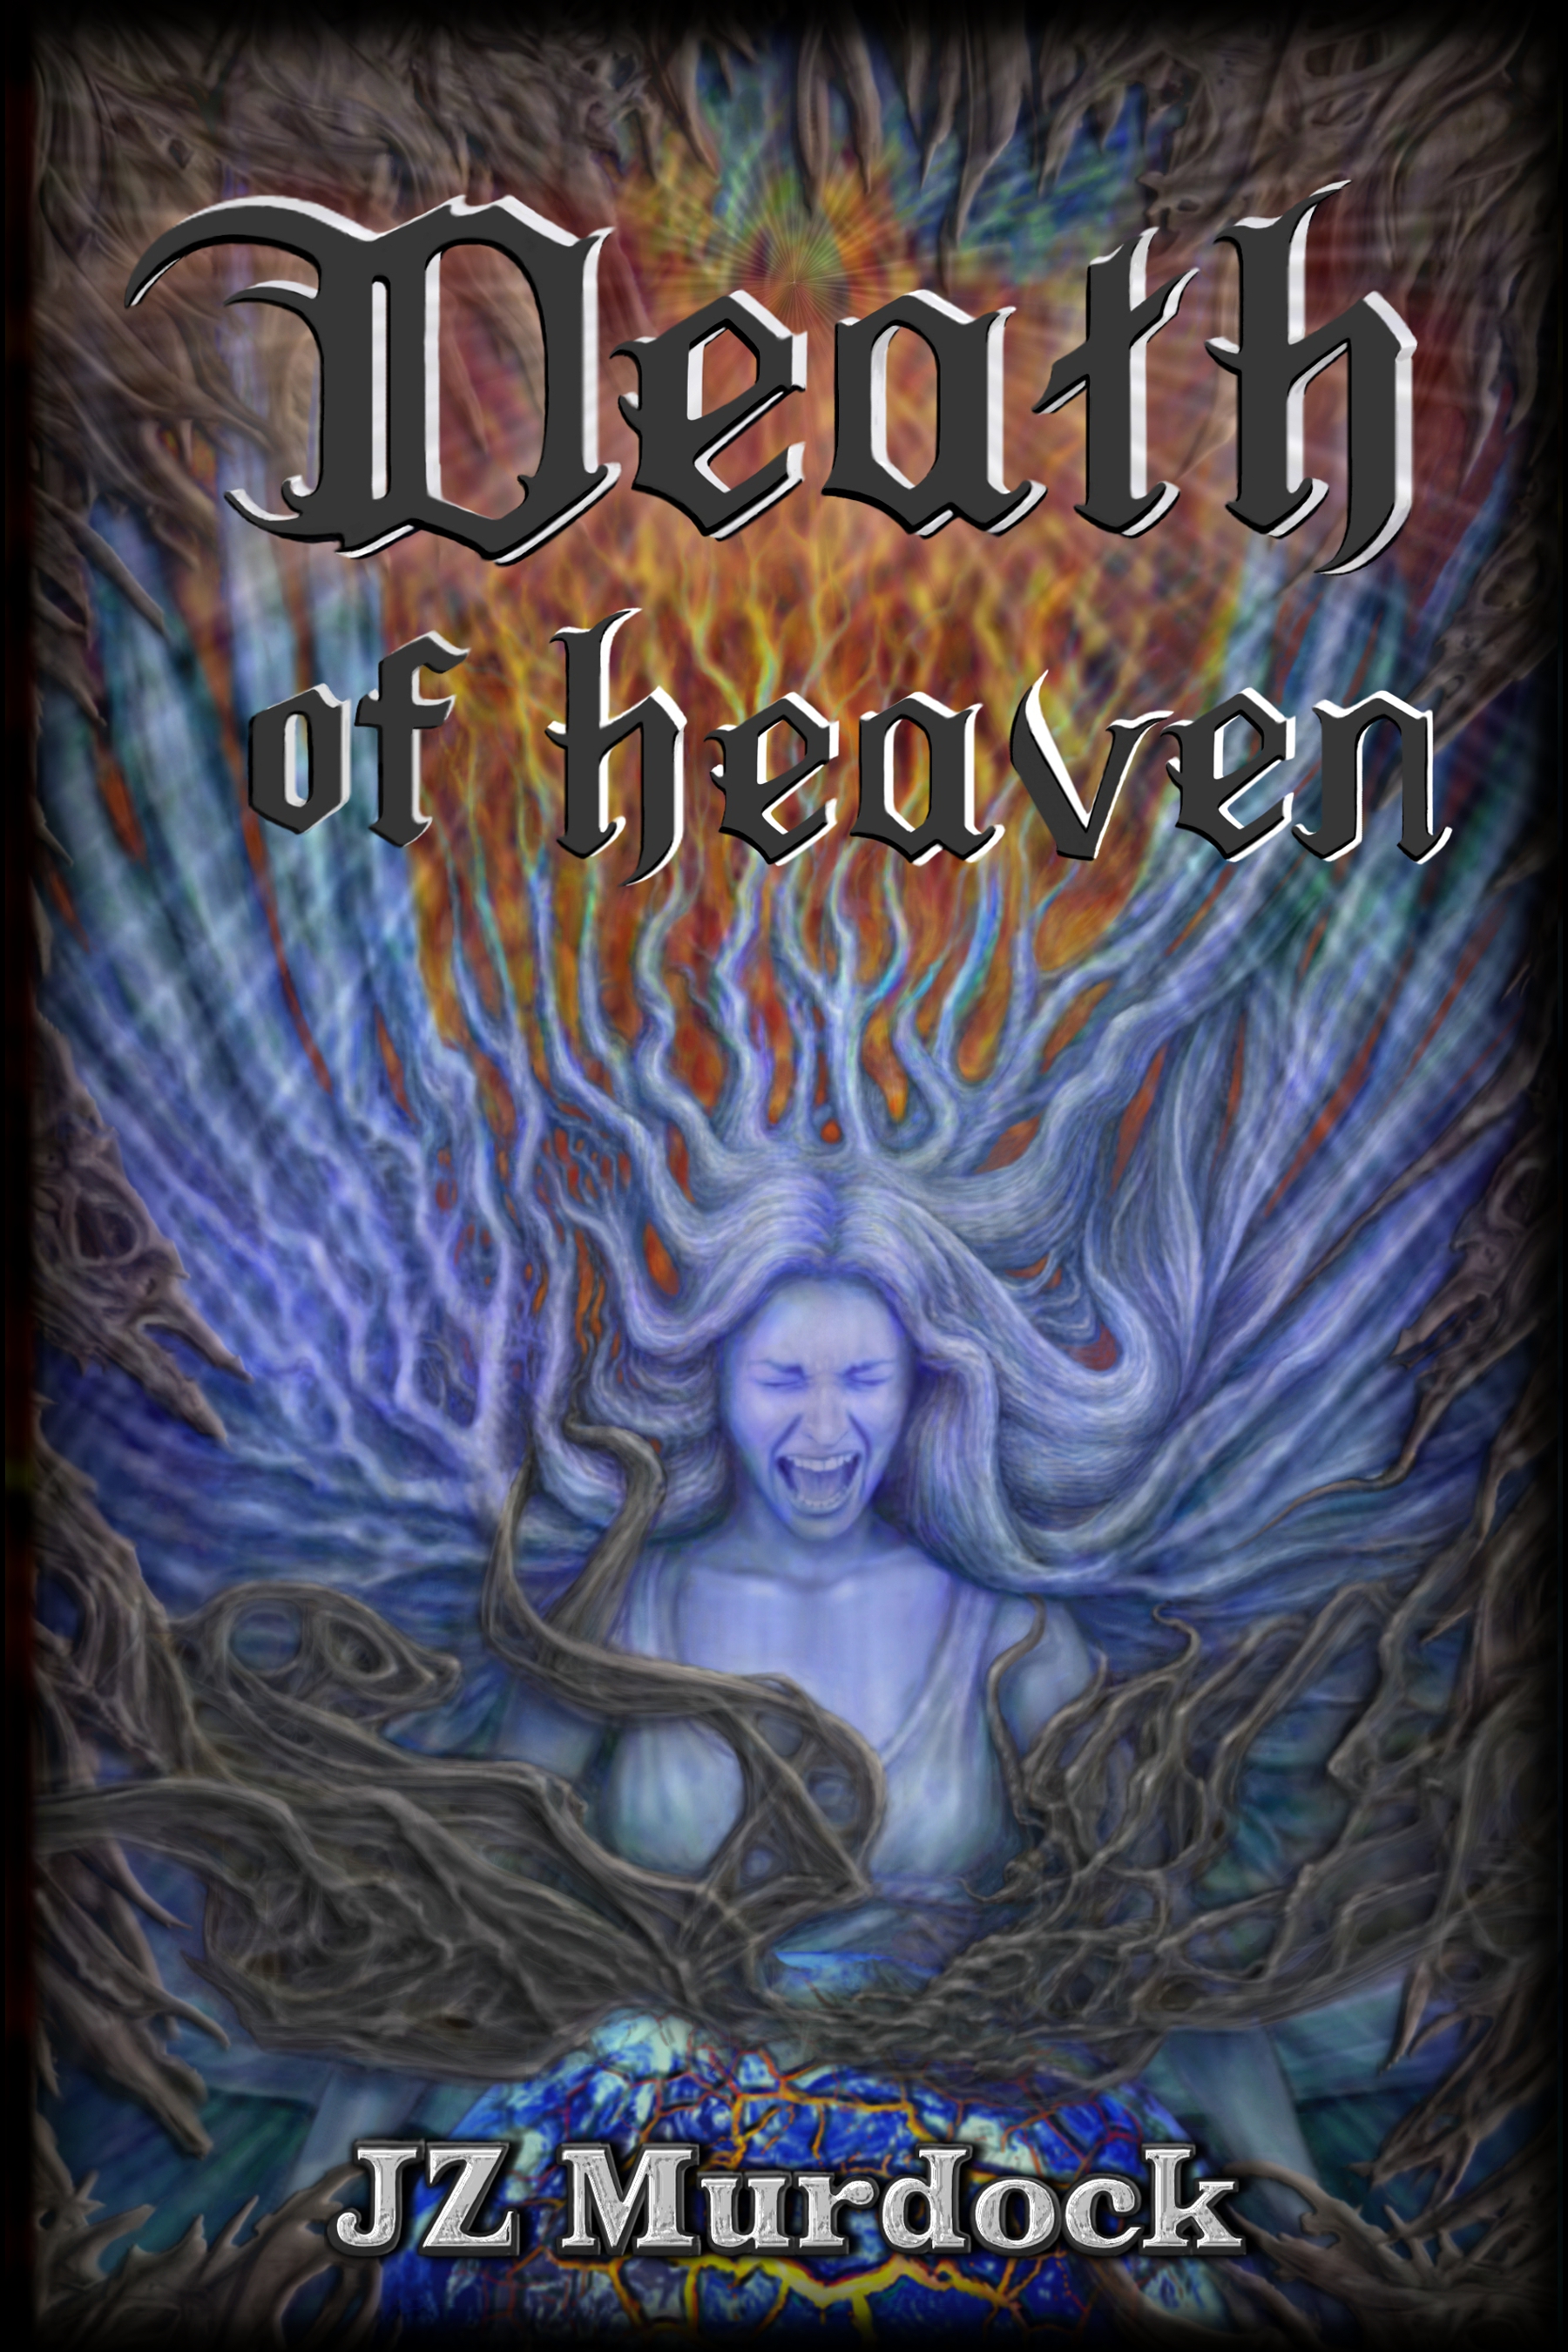 My horror book of rather epic proportions. http://deathofheaven.com/